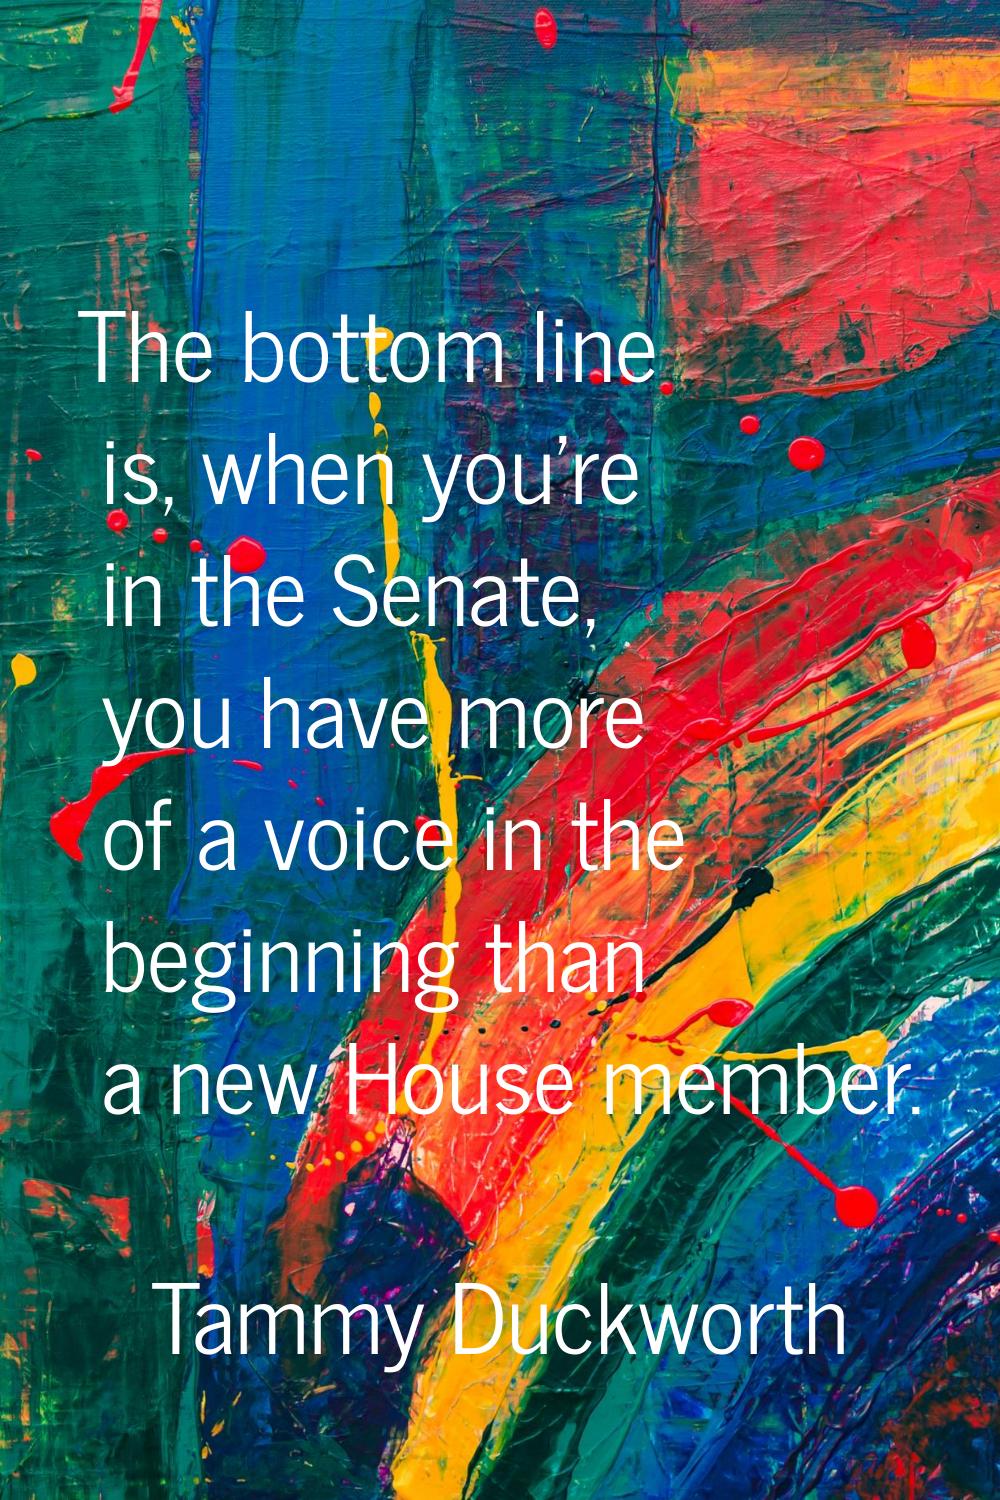 The bottom line is, when you're in the Senate, you have more of a voice in the beginning than a new